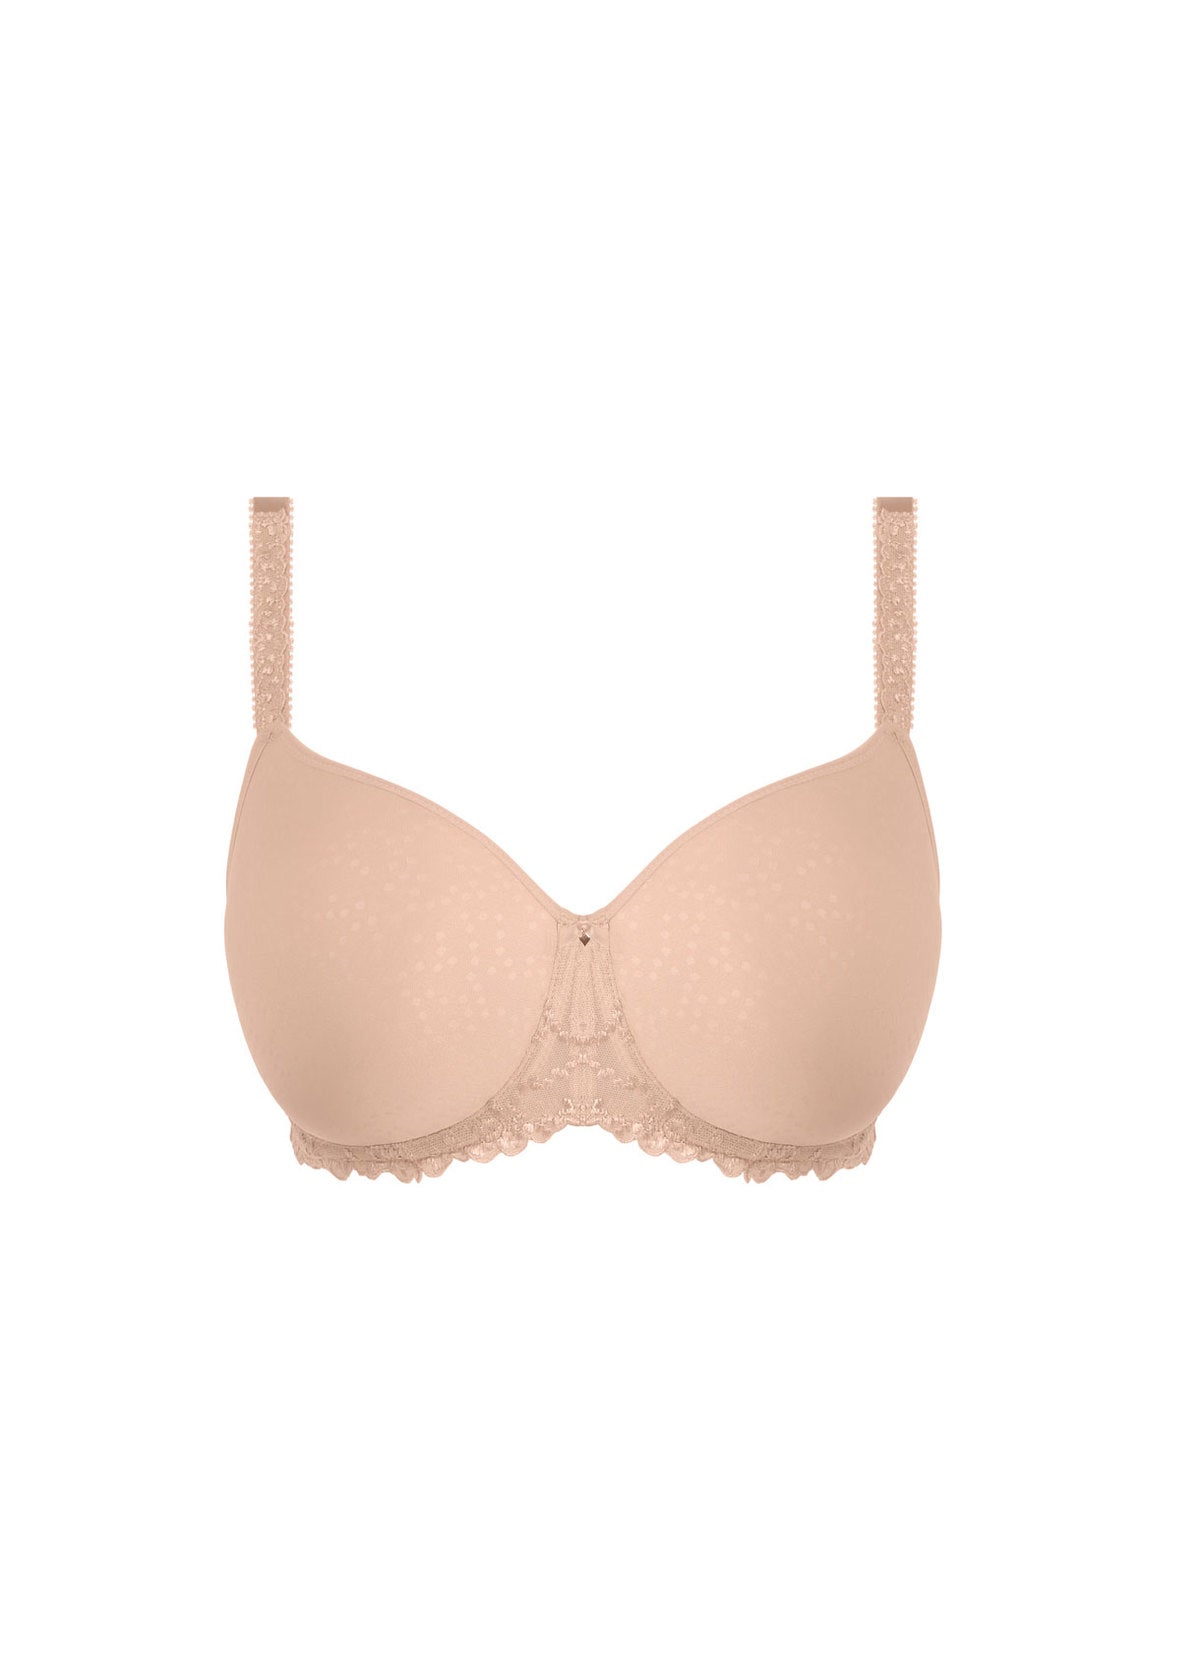 Ana Spacer Moulded Bra In Natural Beige by Fantasie – My Bare